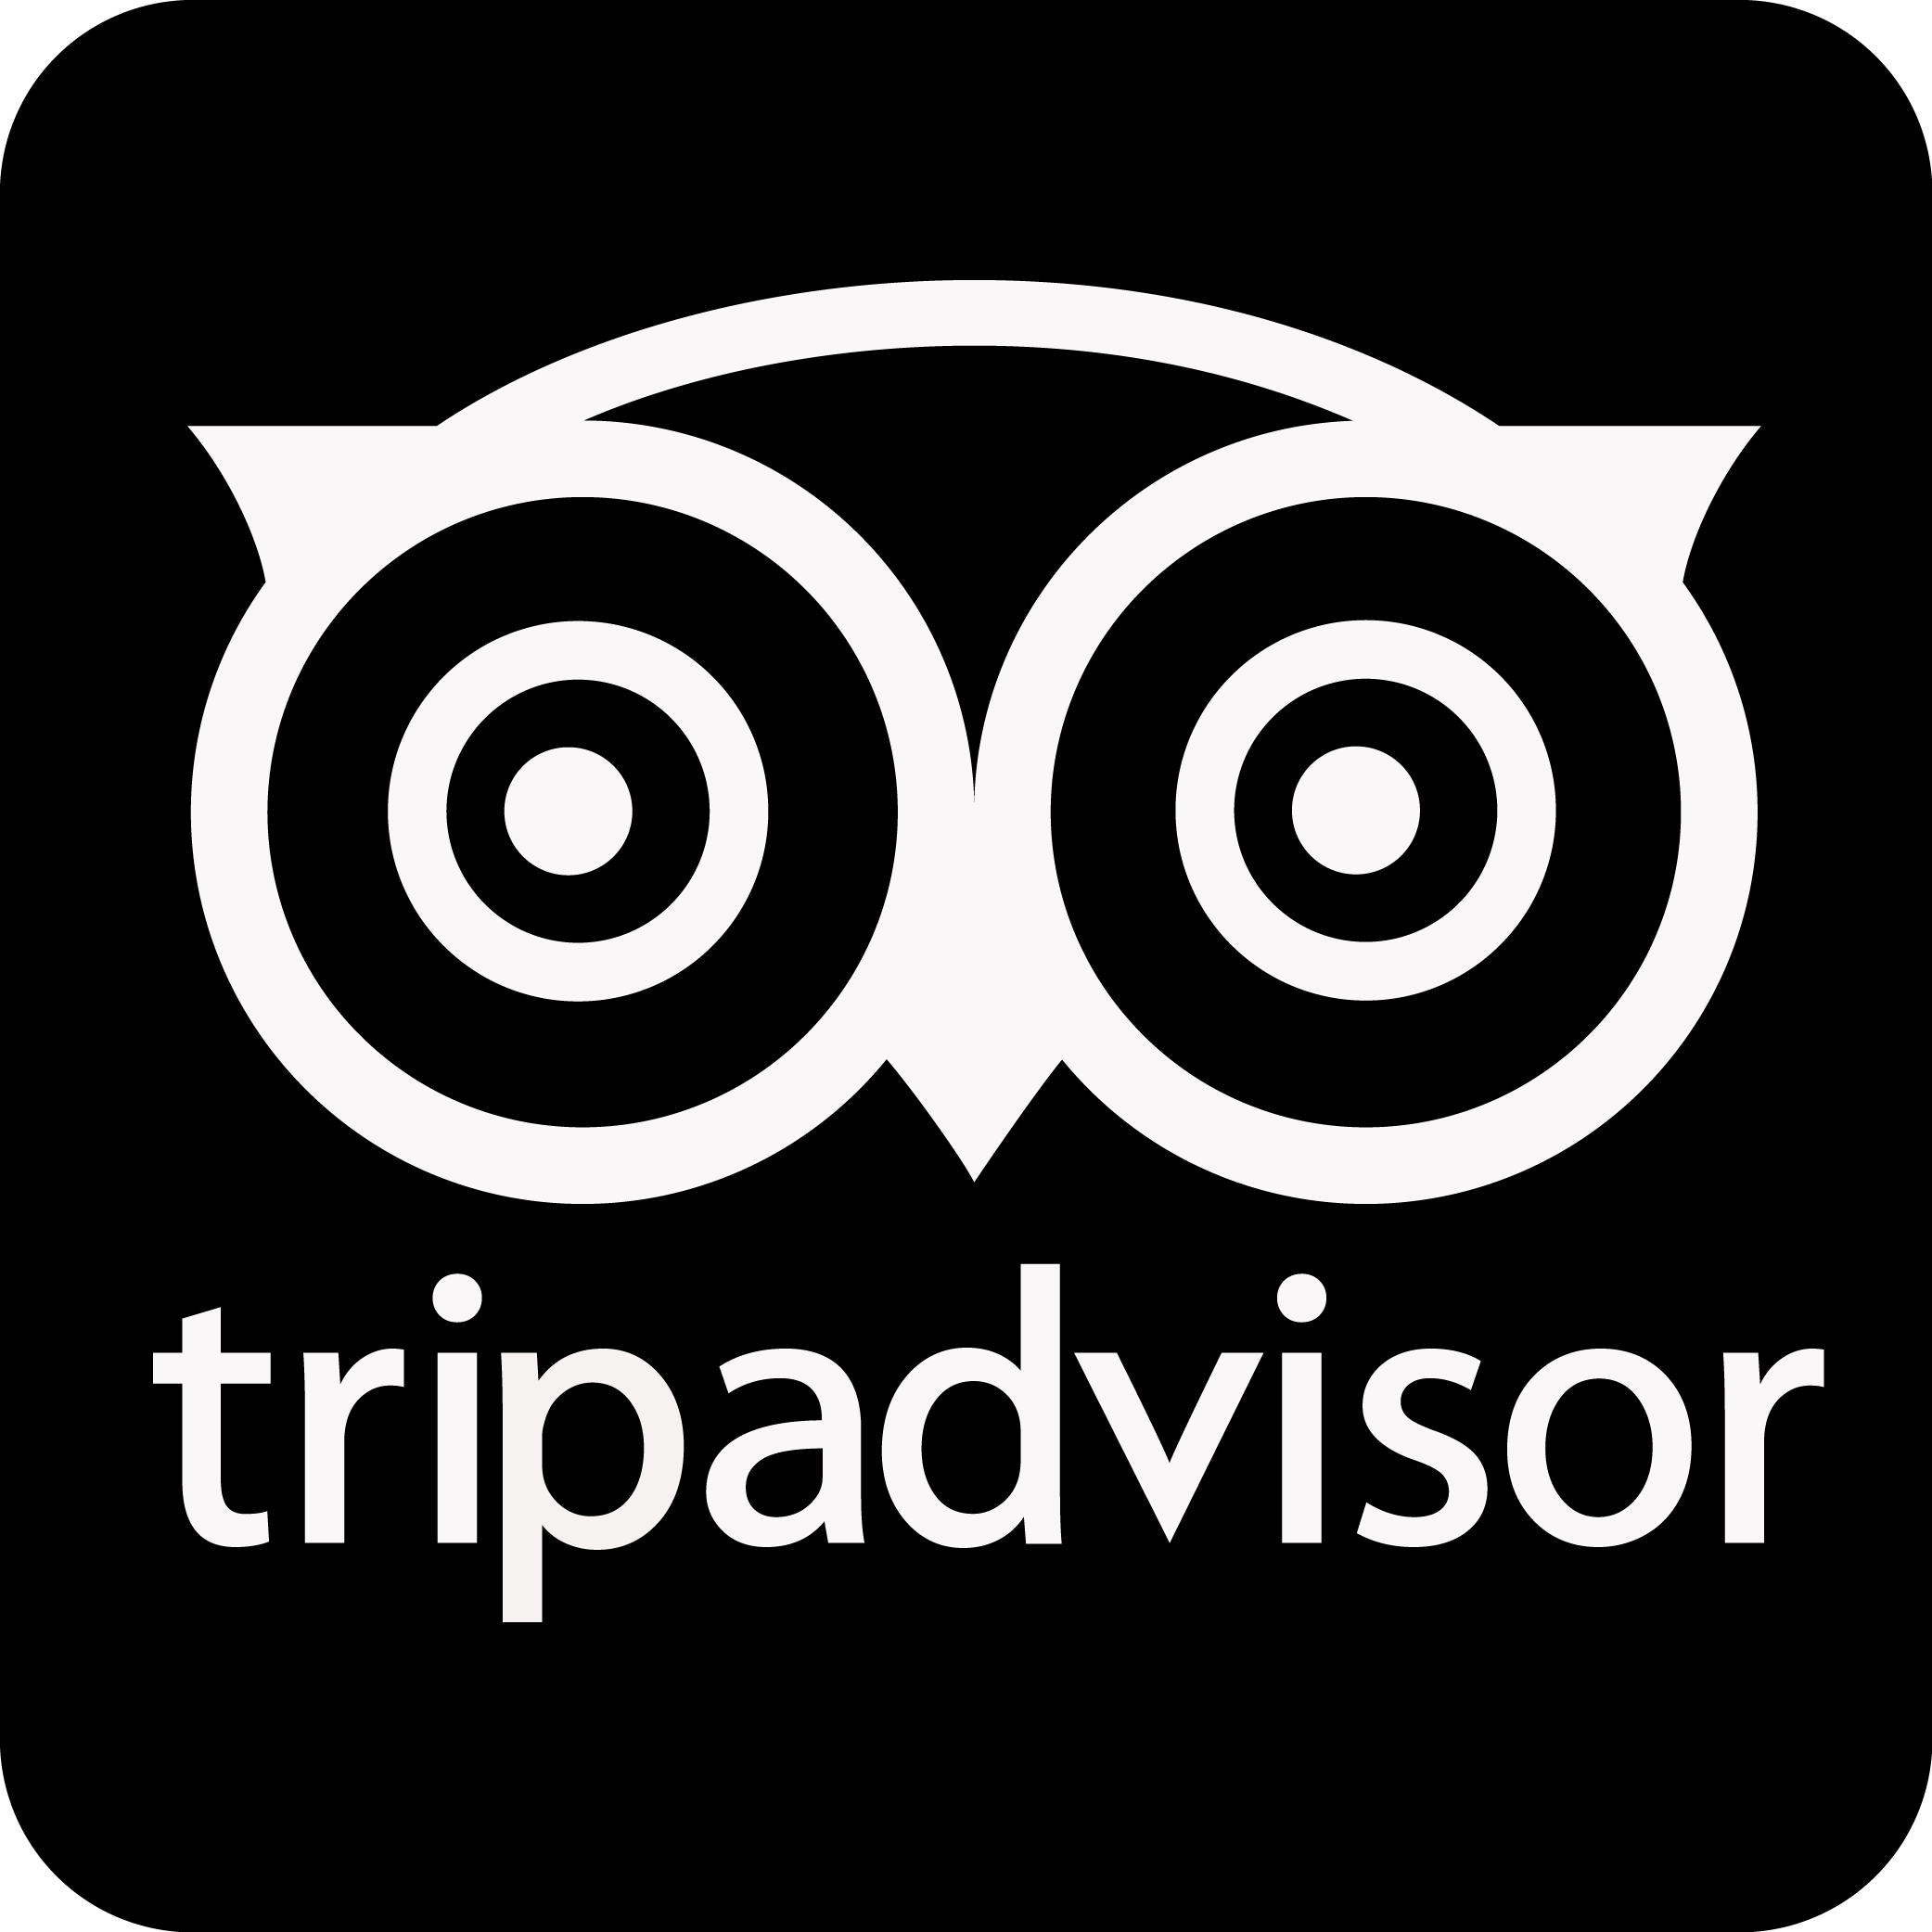 Visit our page on Trip Advisor